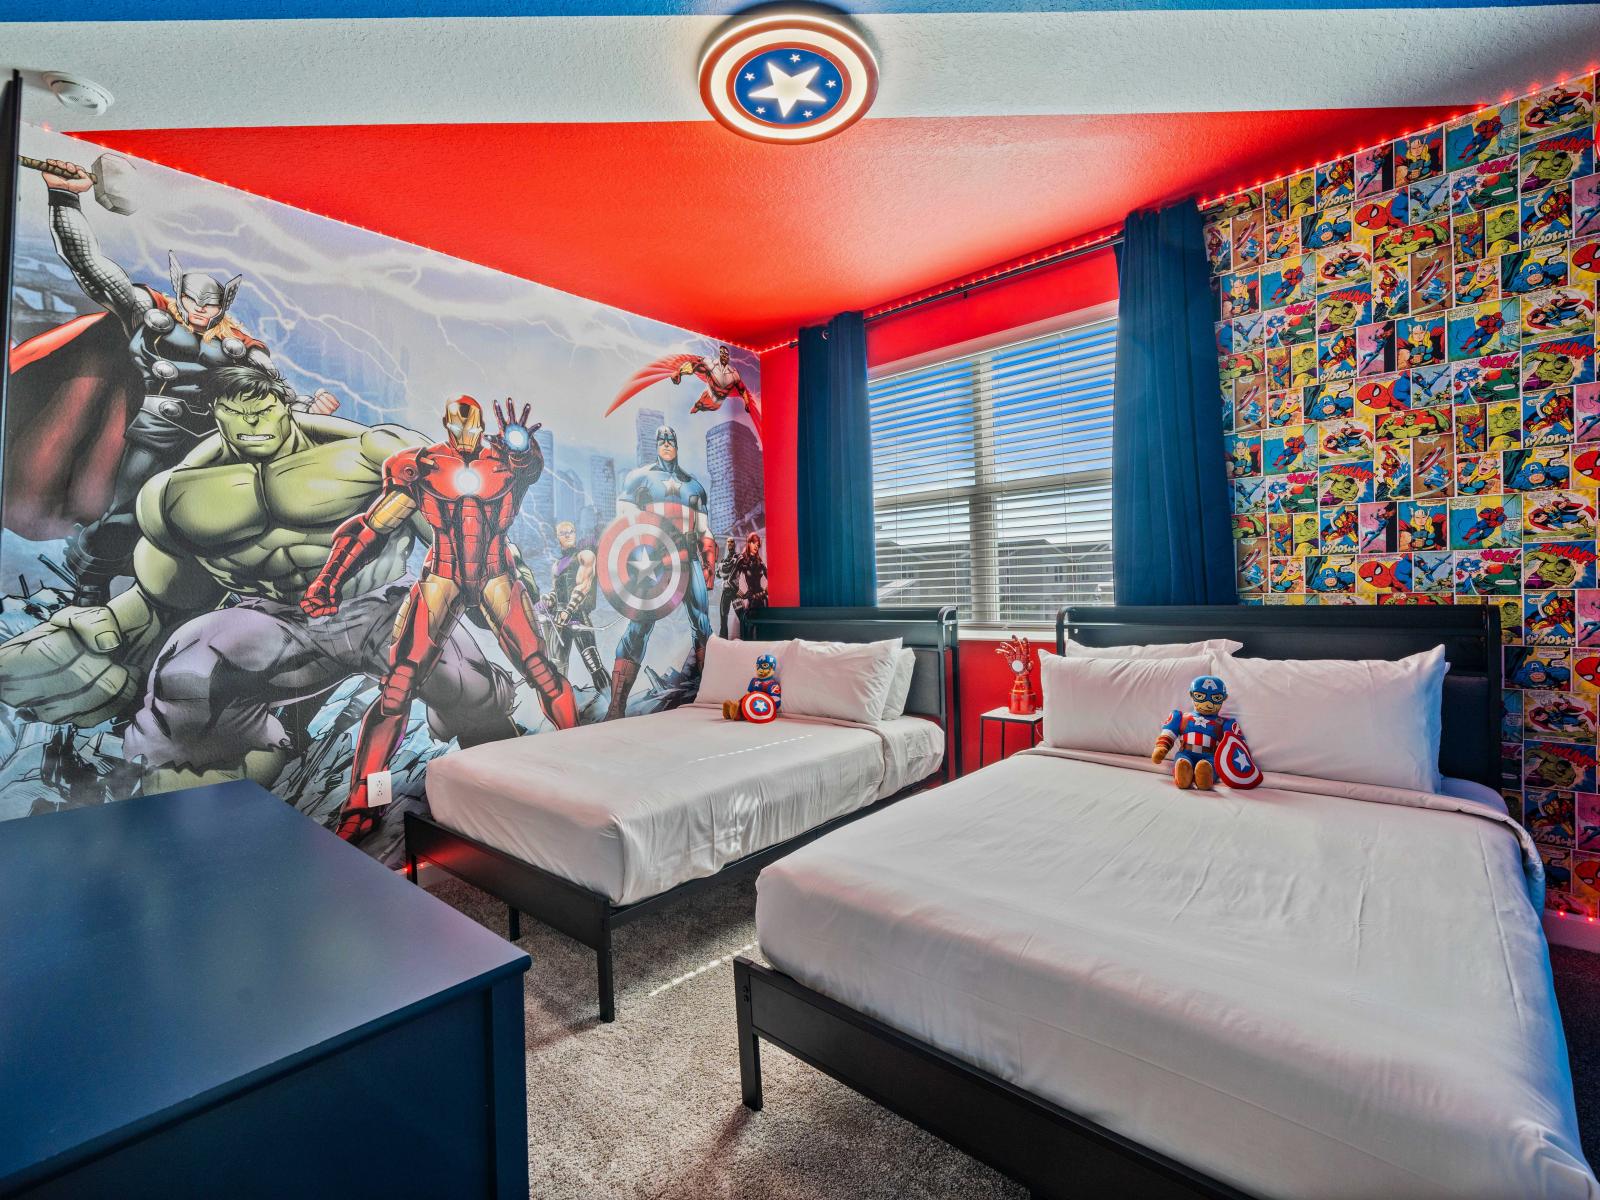 Avengers Themed Bedroom of the Home in Davenport Florida - Offering a comfortable and exciting retreat inspired by iconic superheroes - Smart TV and Netflix - Bright and airy bedroom with large windows for natural illumination